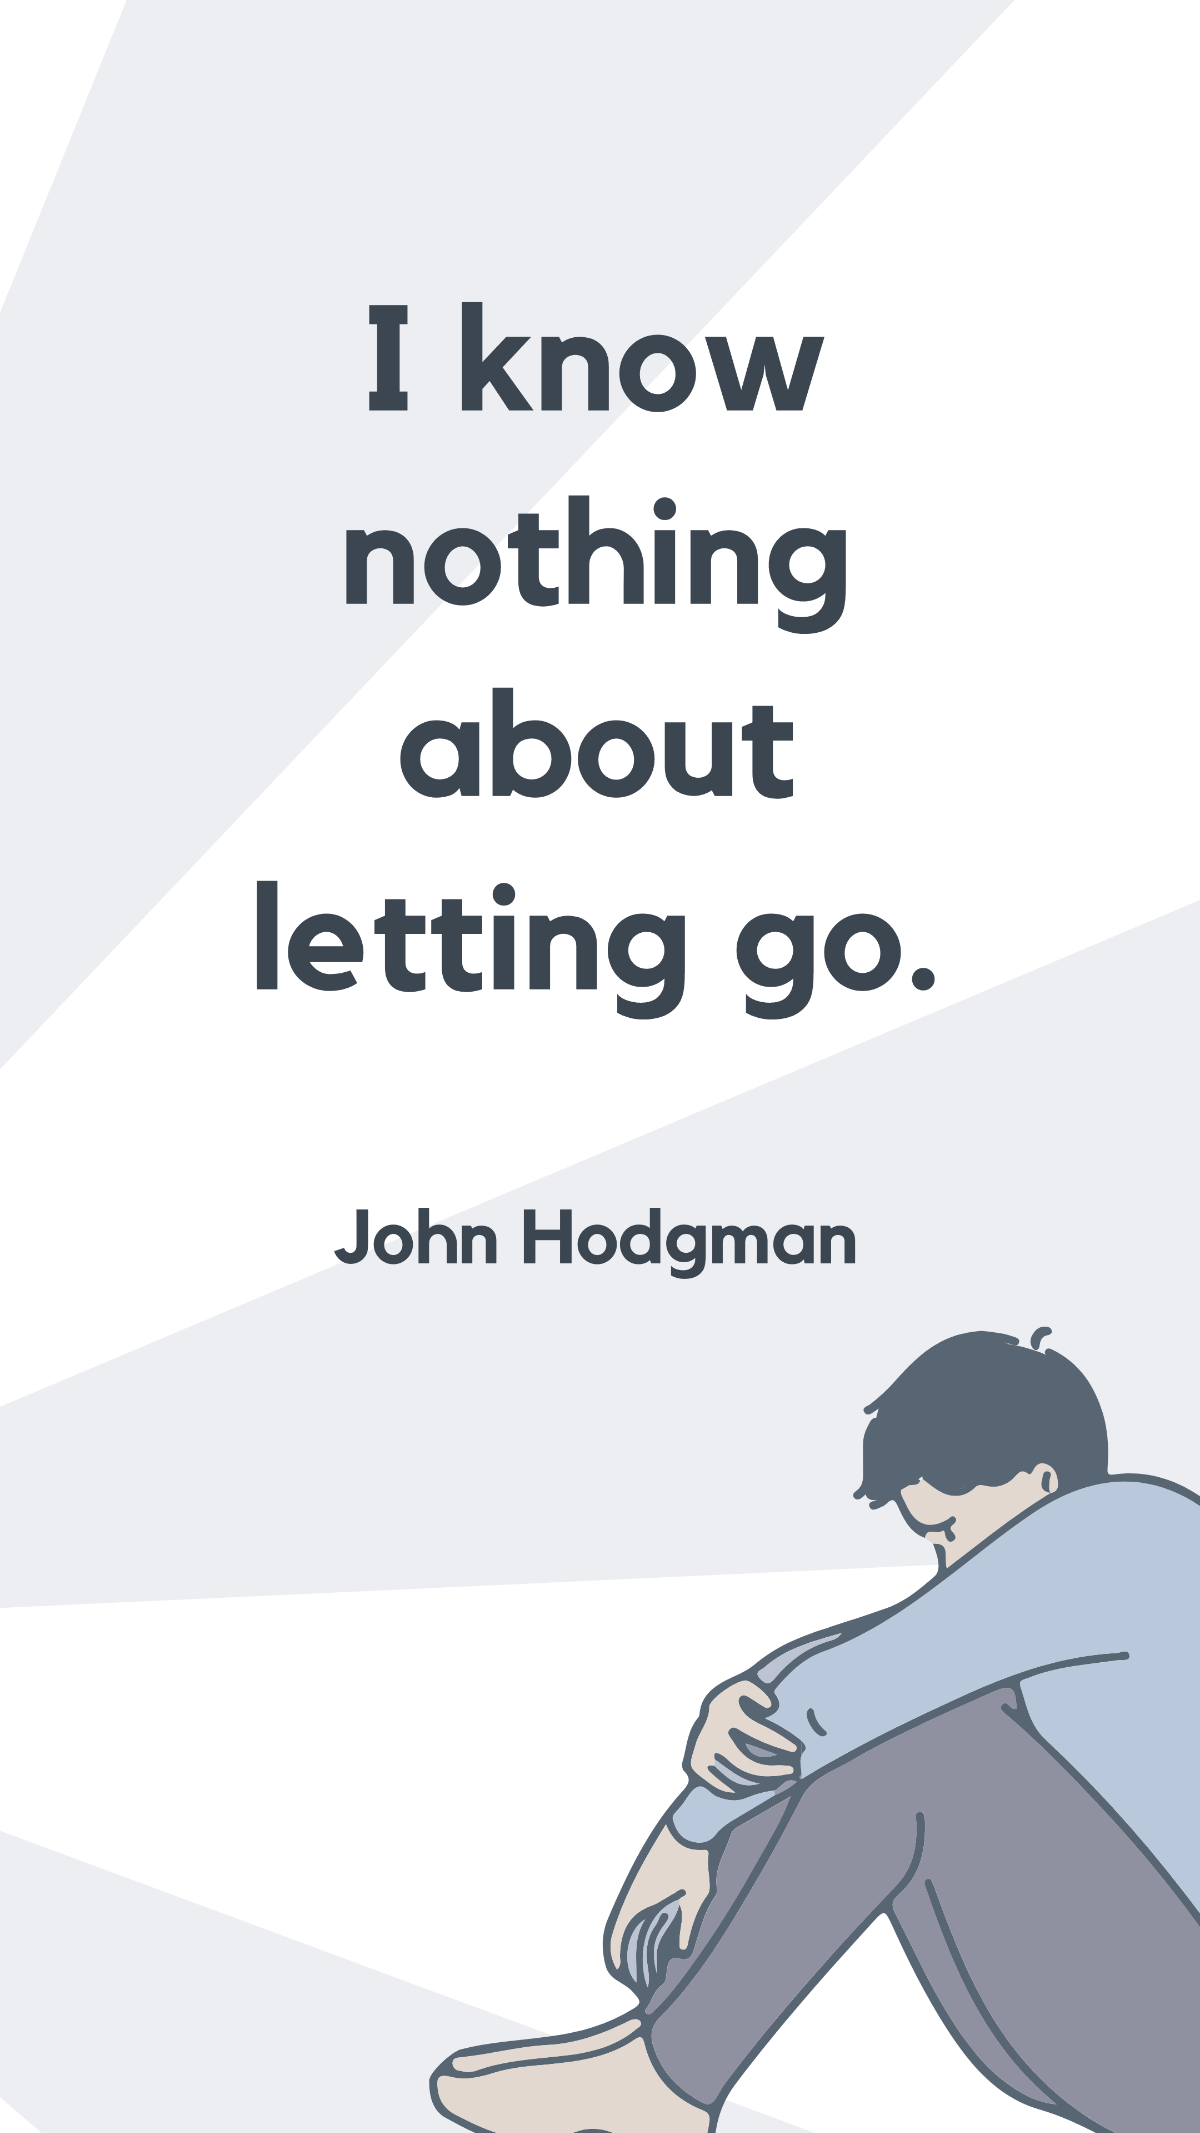 John Hodgman - I know nothing about letting go. Template